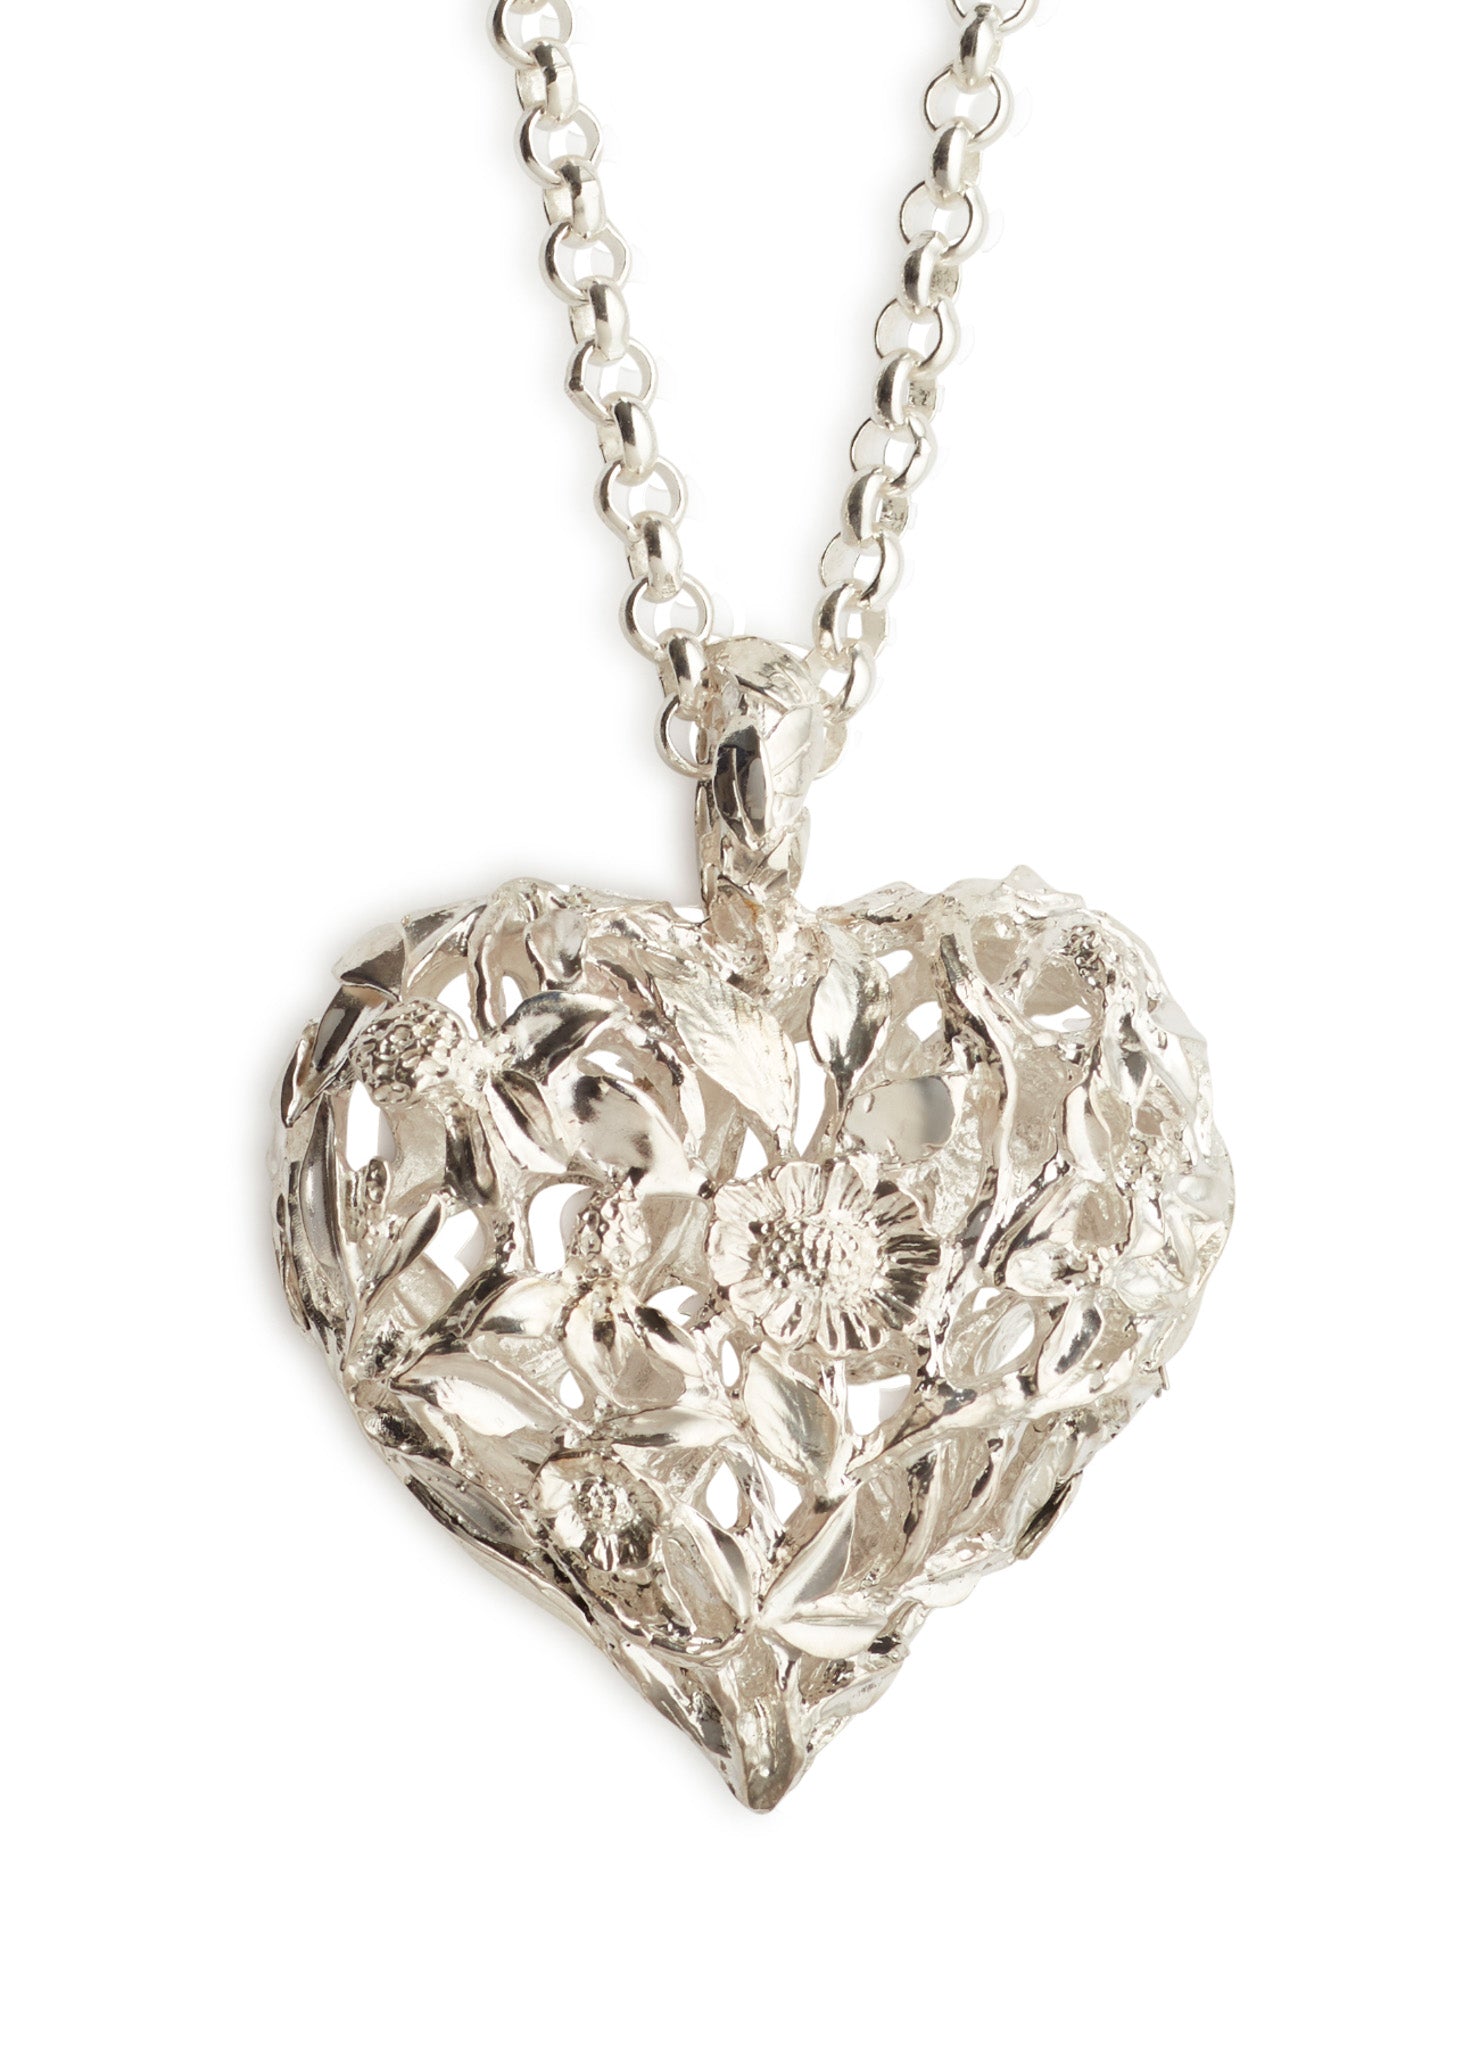 Red clover heart necklace in silver